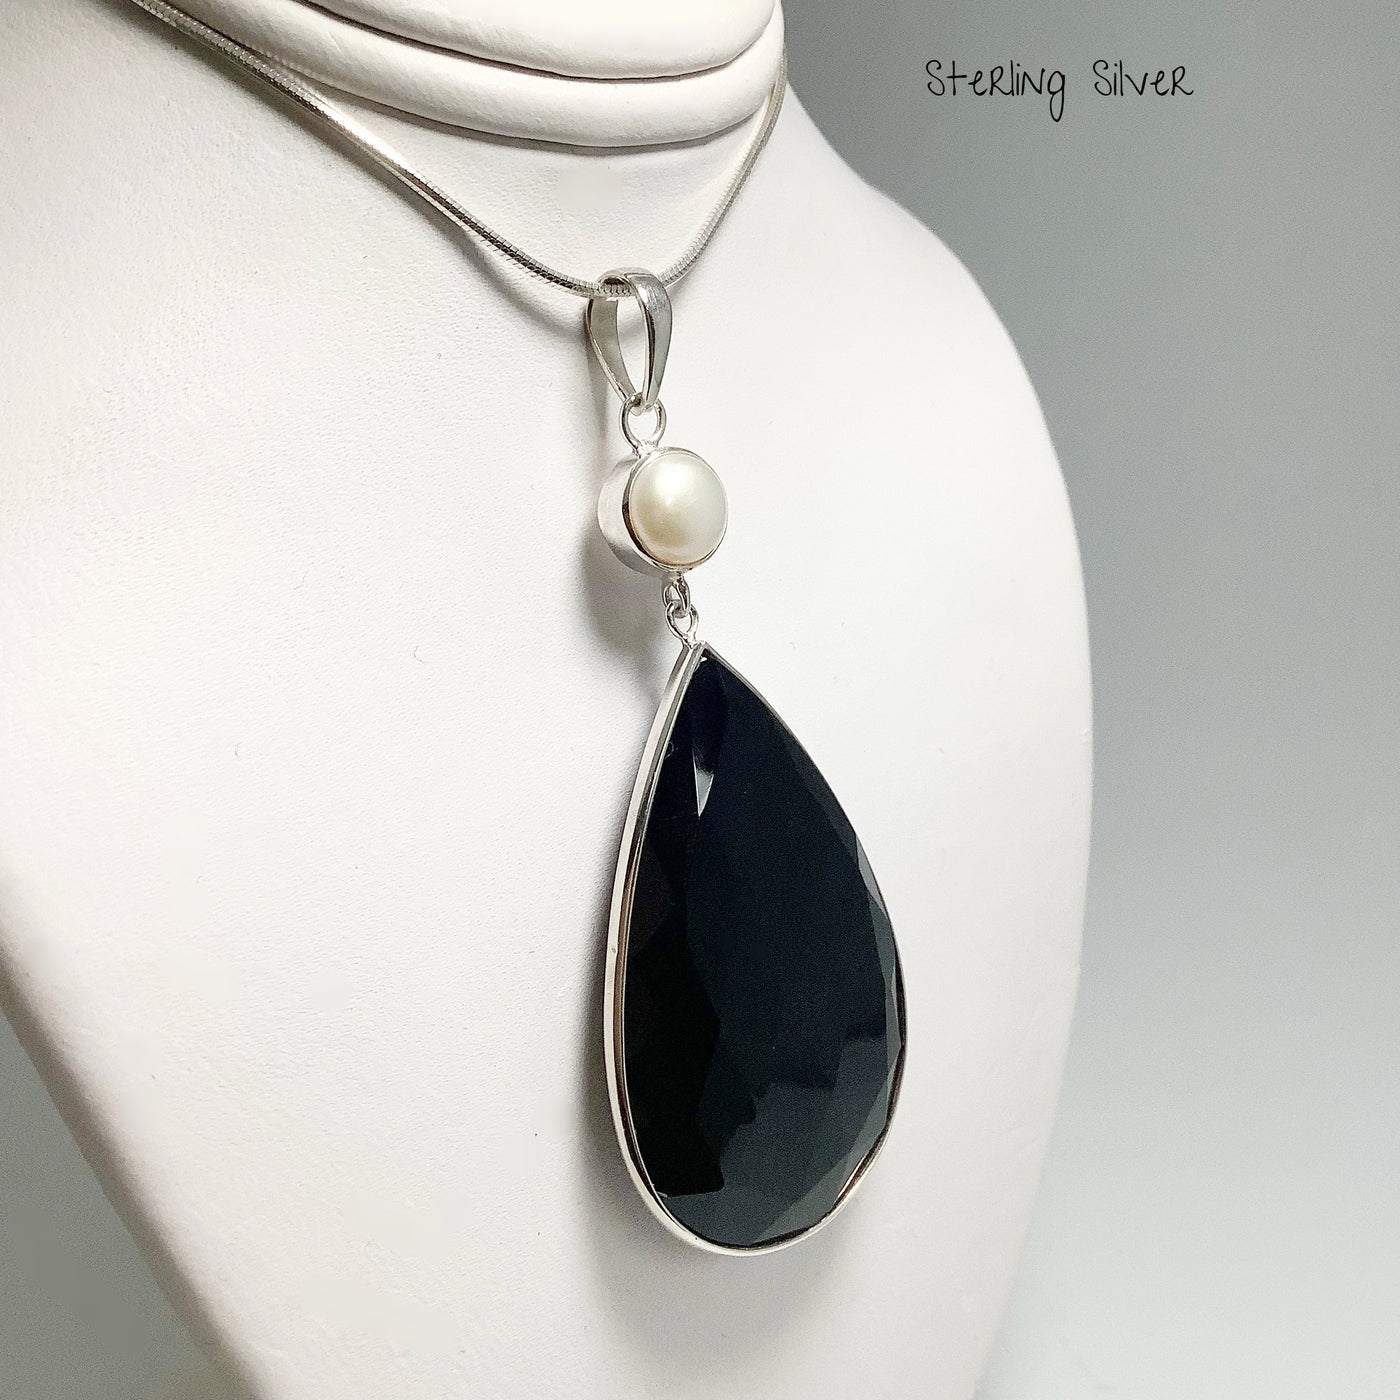 Faceted Black Onyx and Pearl Pendant